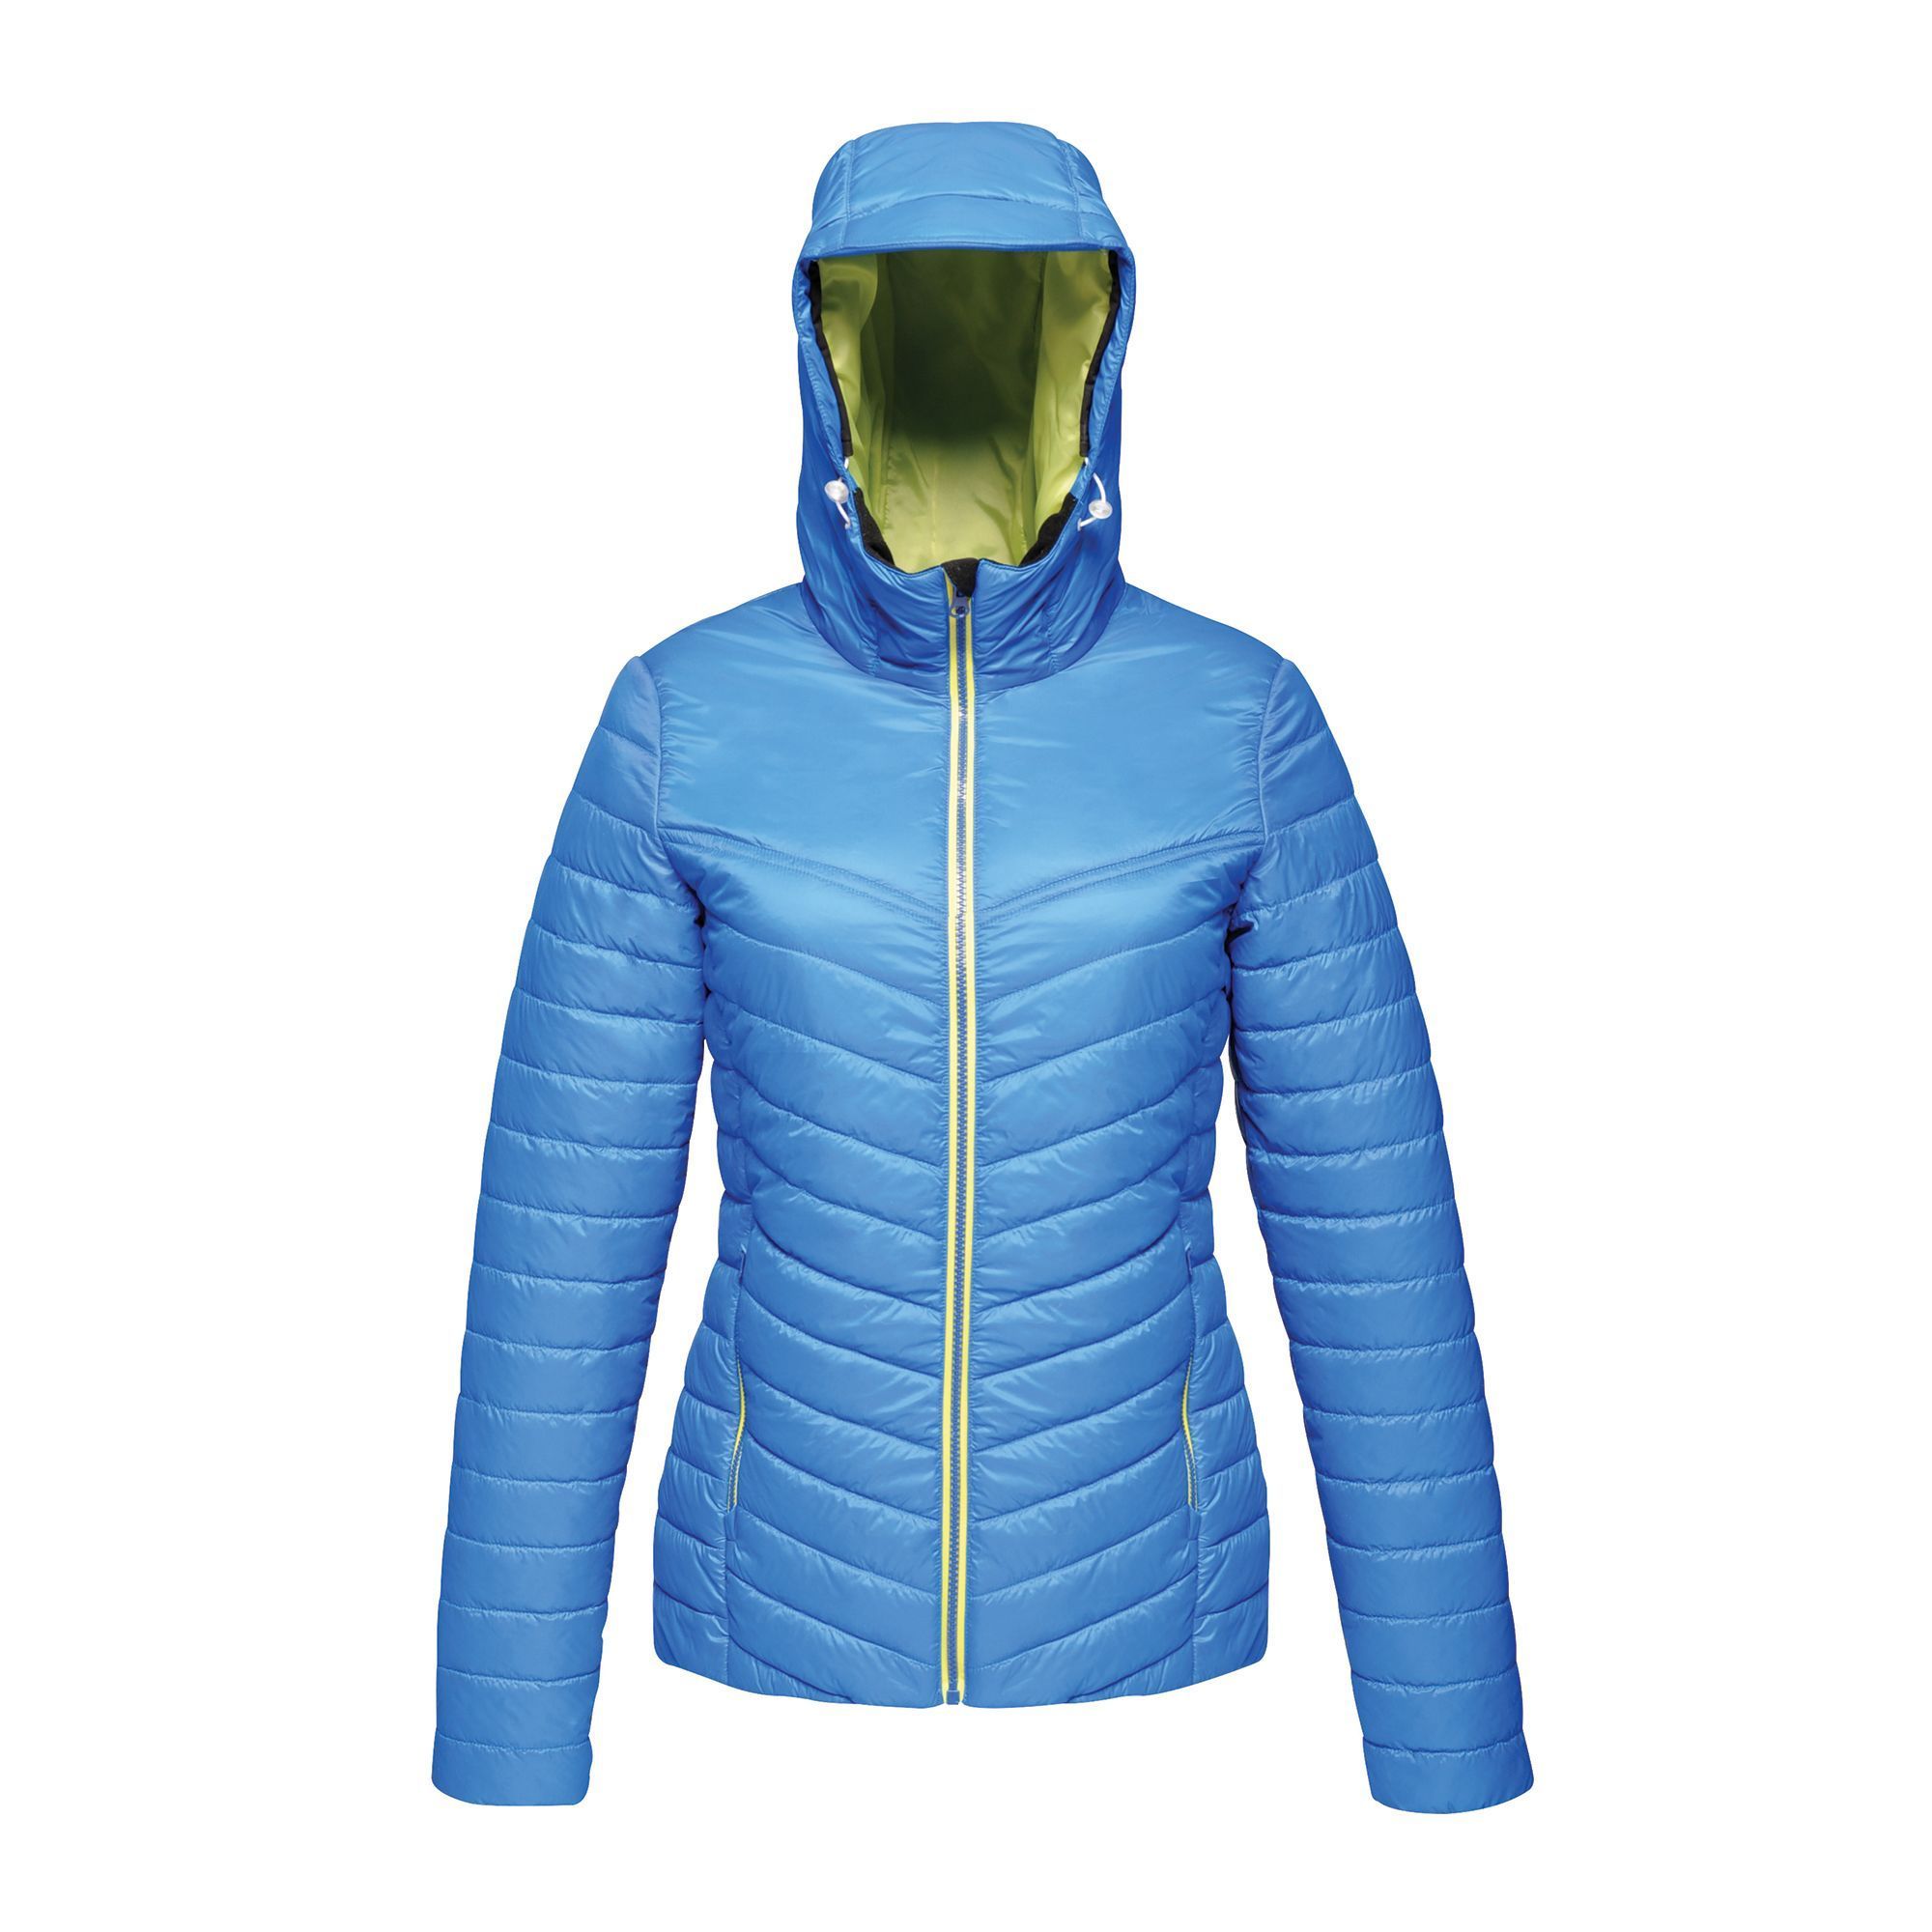 100% Polyamide with water repellent and cire finish. 140 GSM body insulation wadding weight. Polyester taffeta lining. Grown on insulated hood. Stretch binding to hood opening, cuffs and hem. 2 zipped lower pockets. Easily compressible.